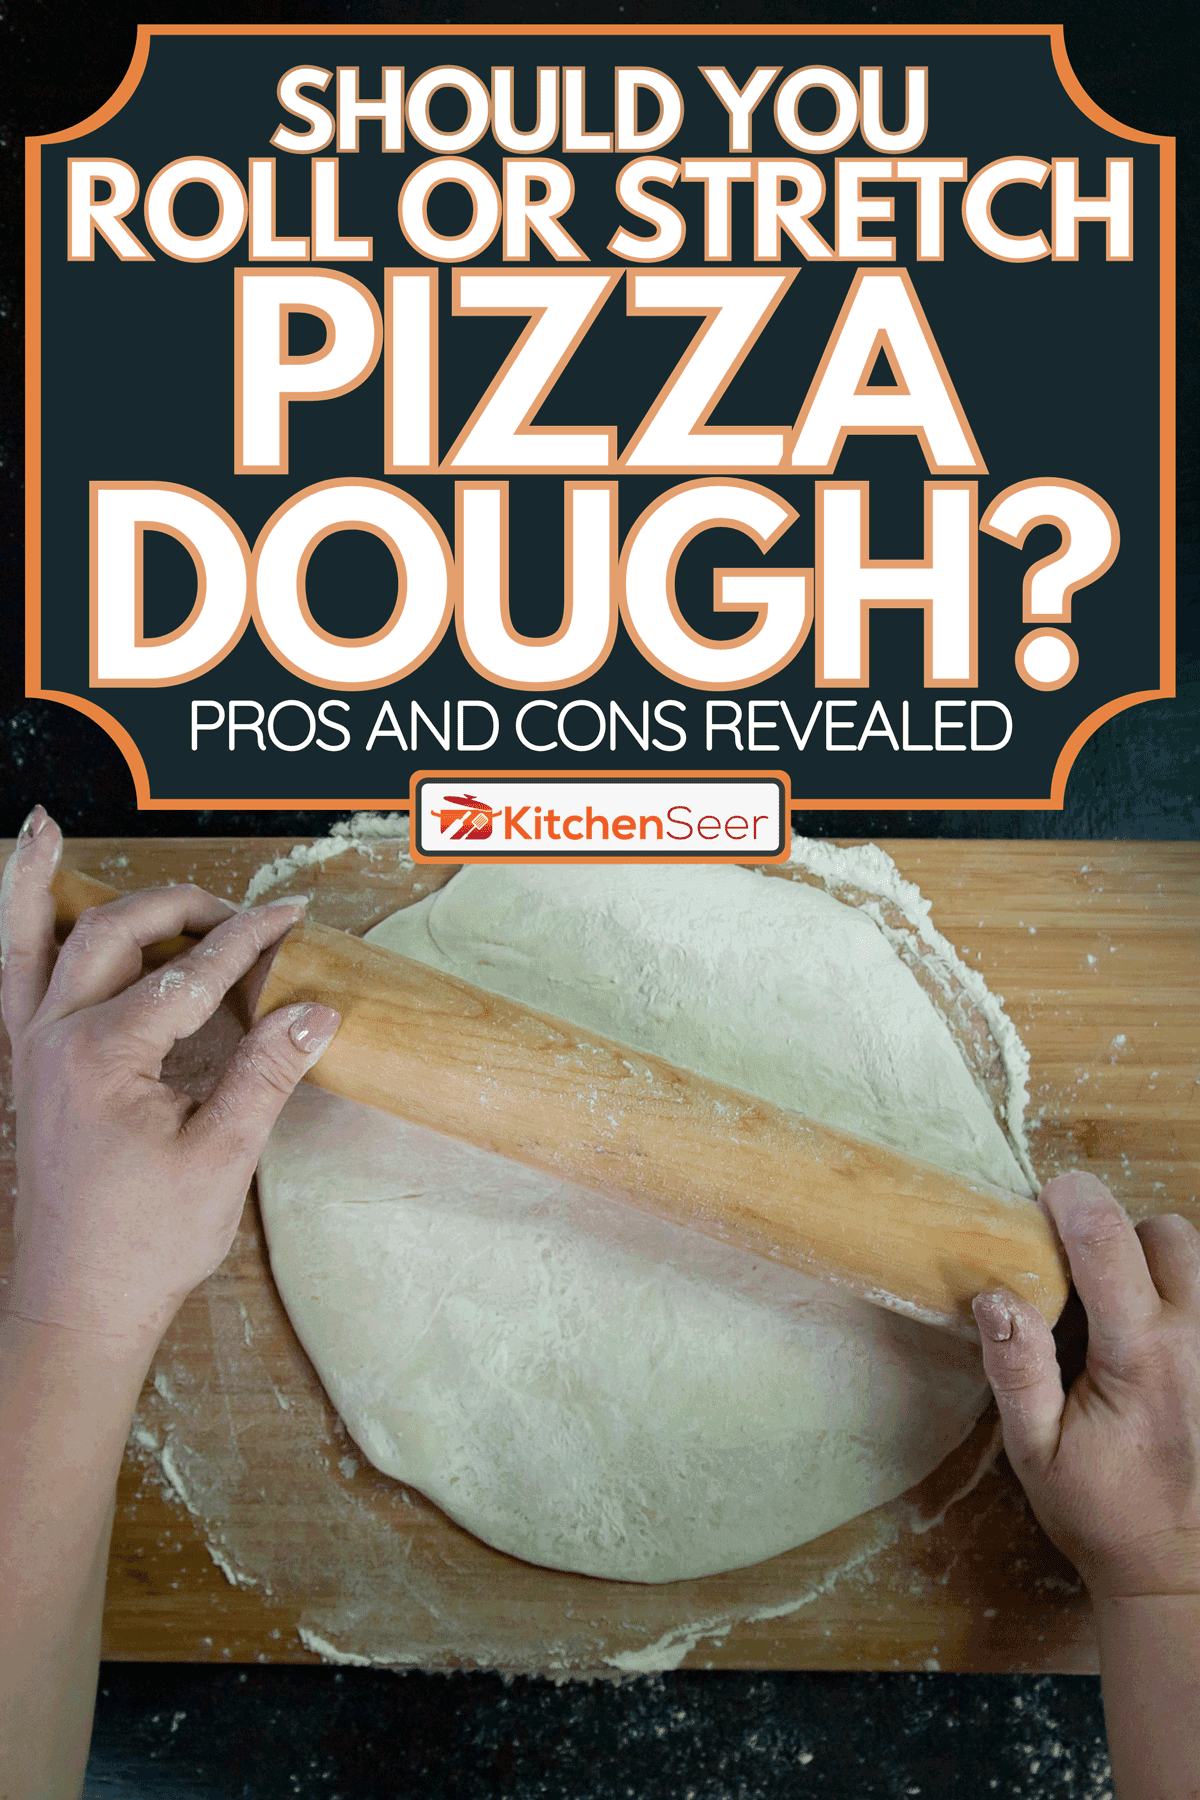 Woman preparing dough for pizza, Should You Roll Or Stretch Pizza Dough? Pros And Cons Revealed